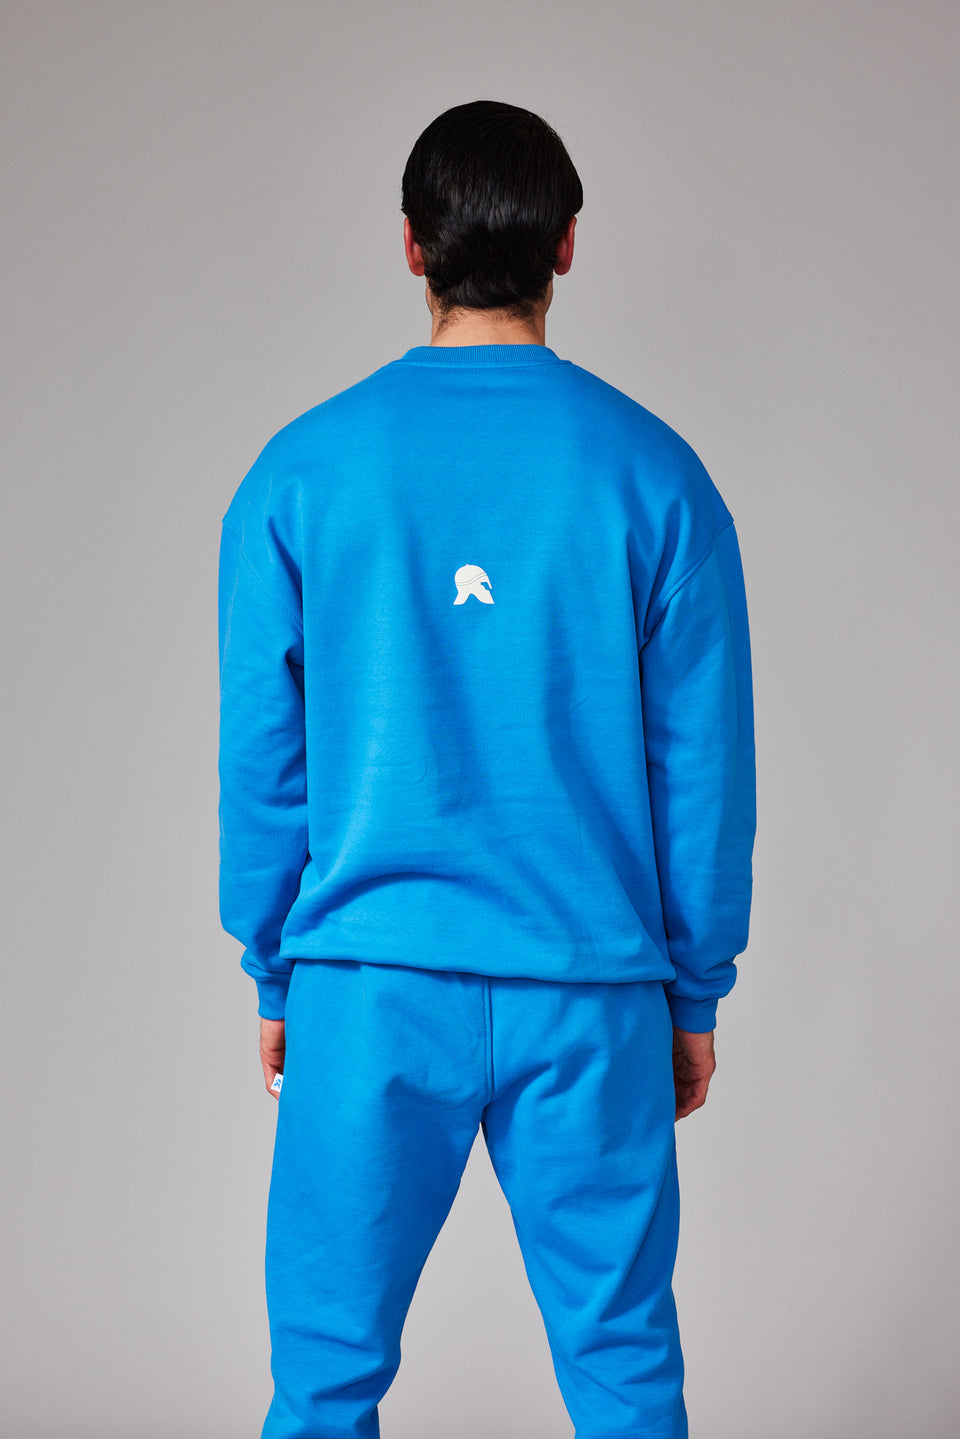 The Bloodline Sweater - Blue